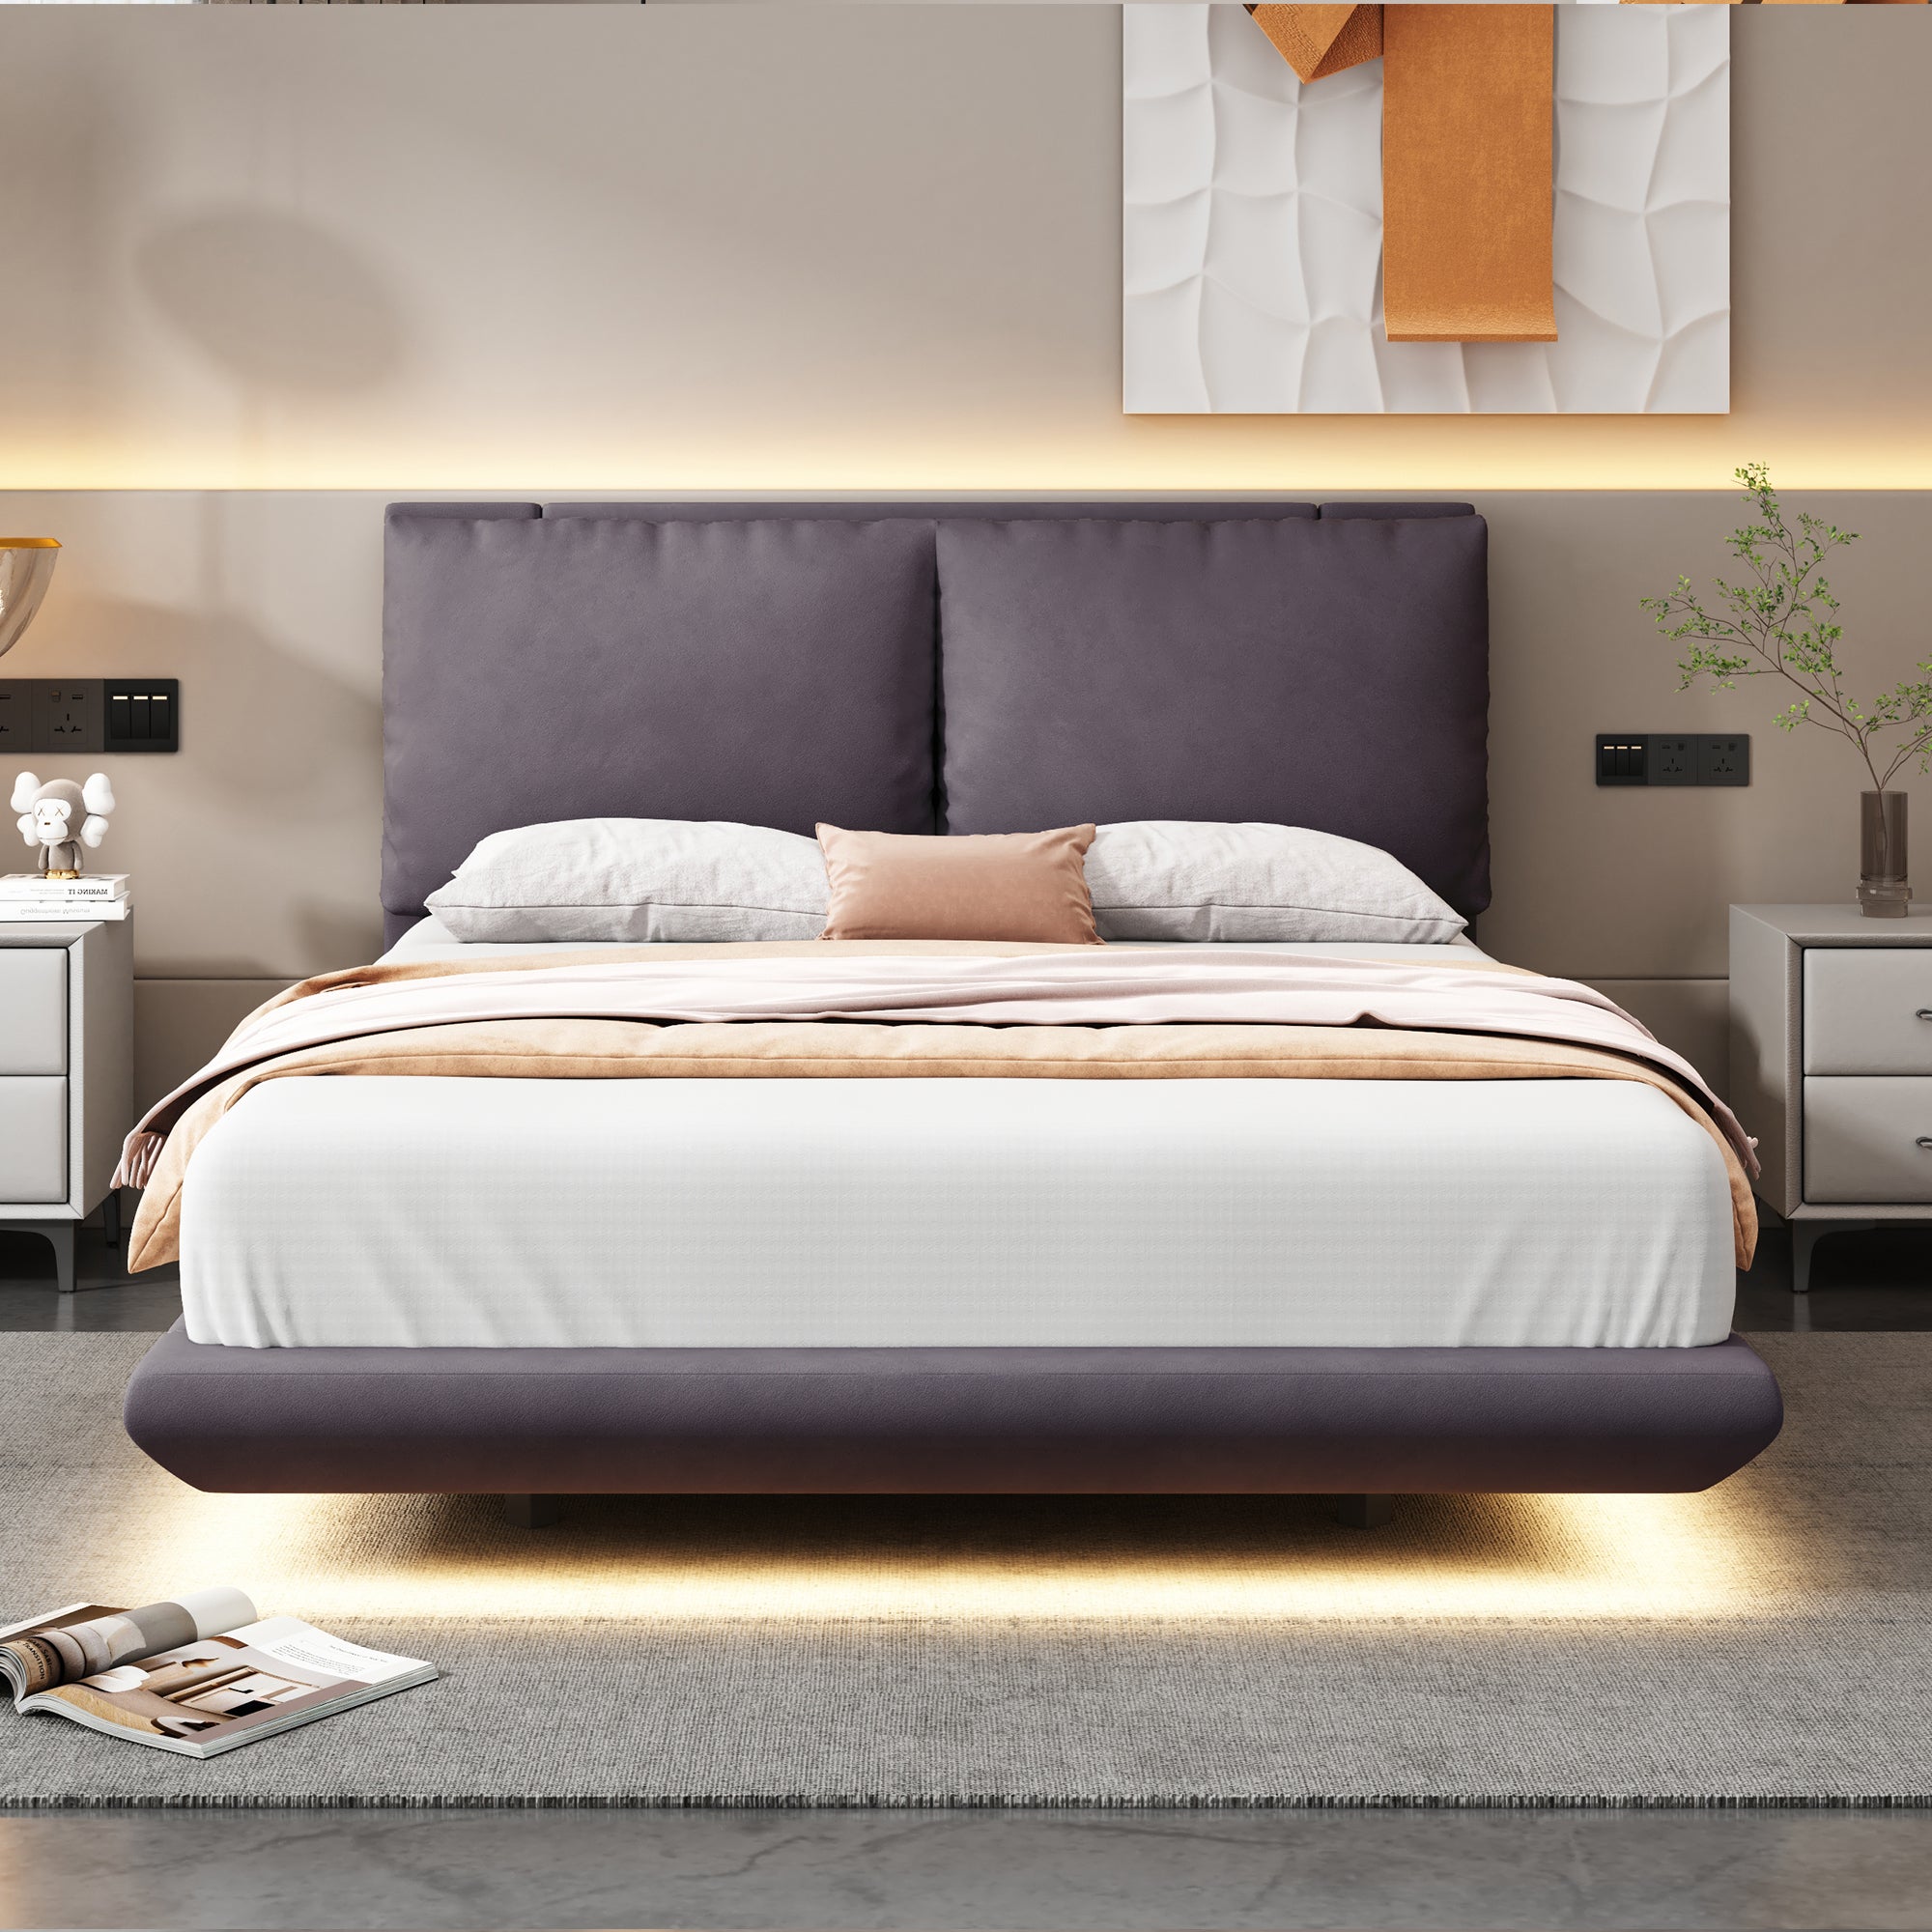 Full Size Bed with Sensor Light and 2 Large Backrests, Stylish Platform Bed with 2 sets of USB Port and Socket on each rear Bed Leg